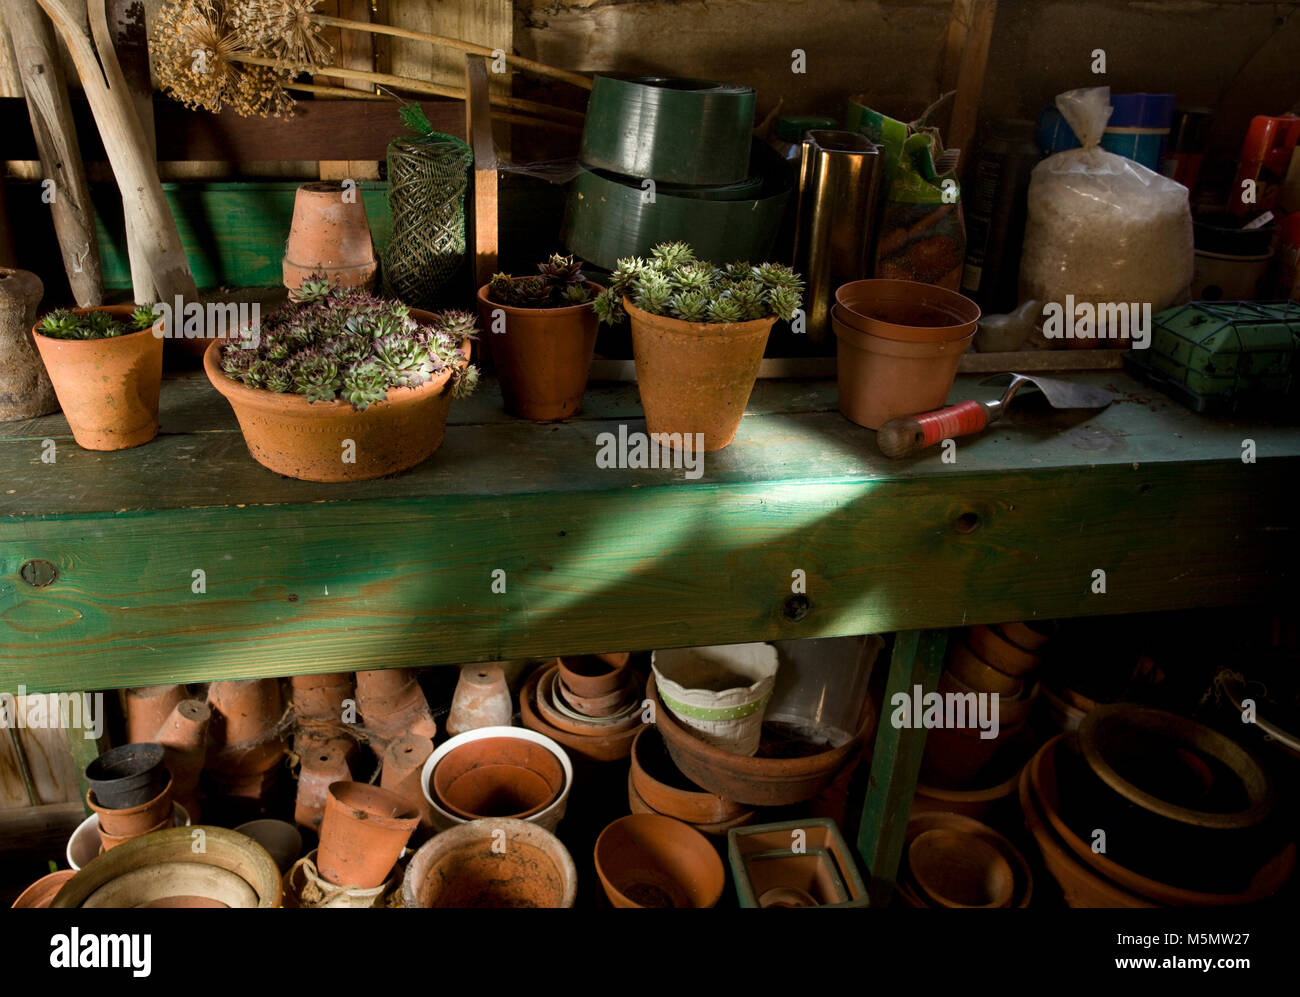 Garden shed interior with plants and plant pots Stock Photo